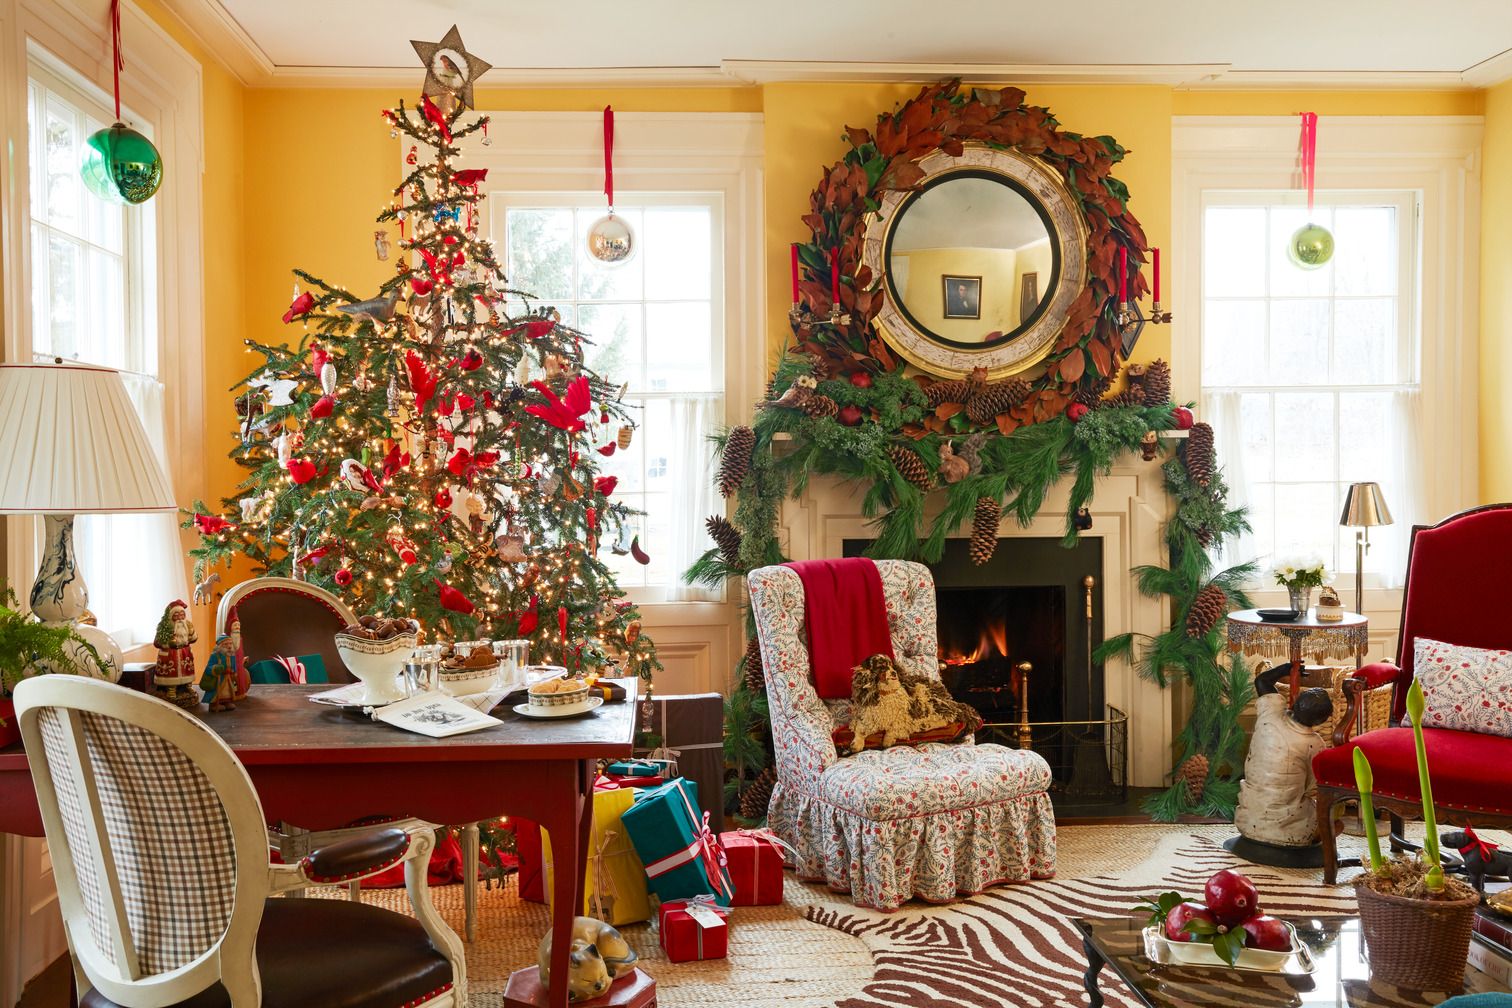 When to Decorate for Christmas - Christmas Decorating Etiquette